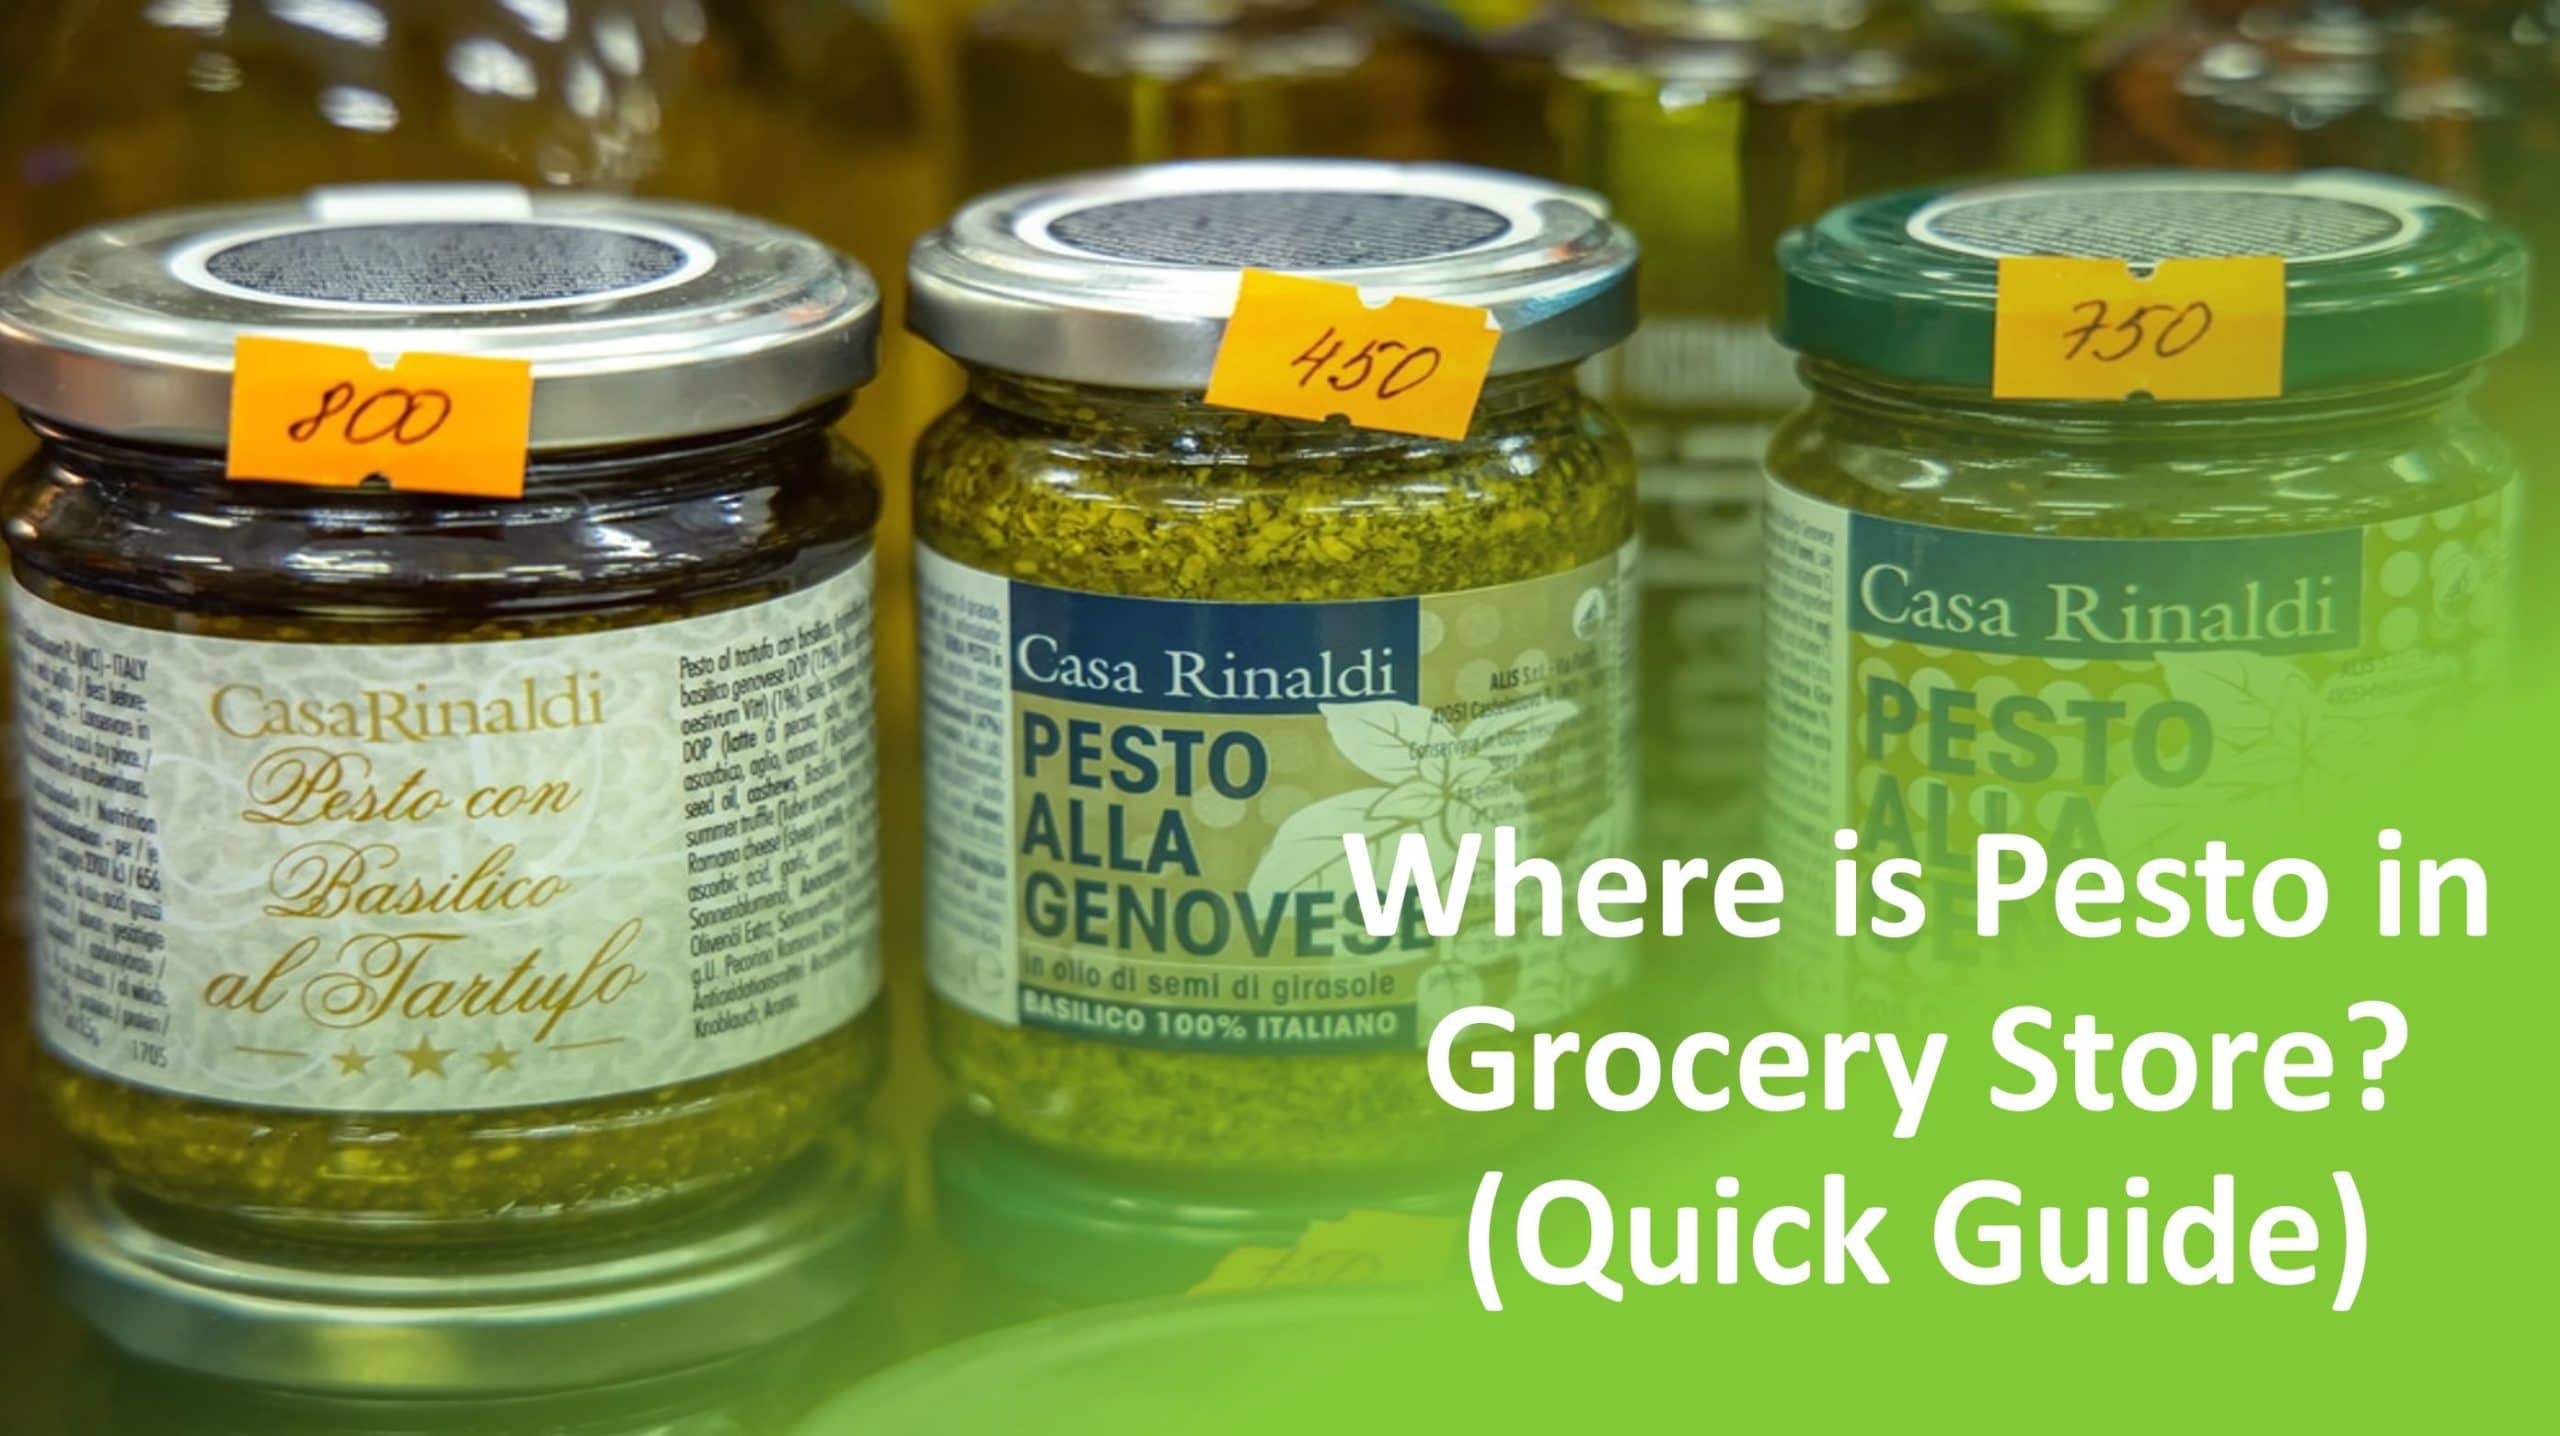 Where is Pesto in Grocery Store? (Quick Guide)